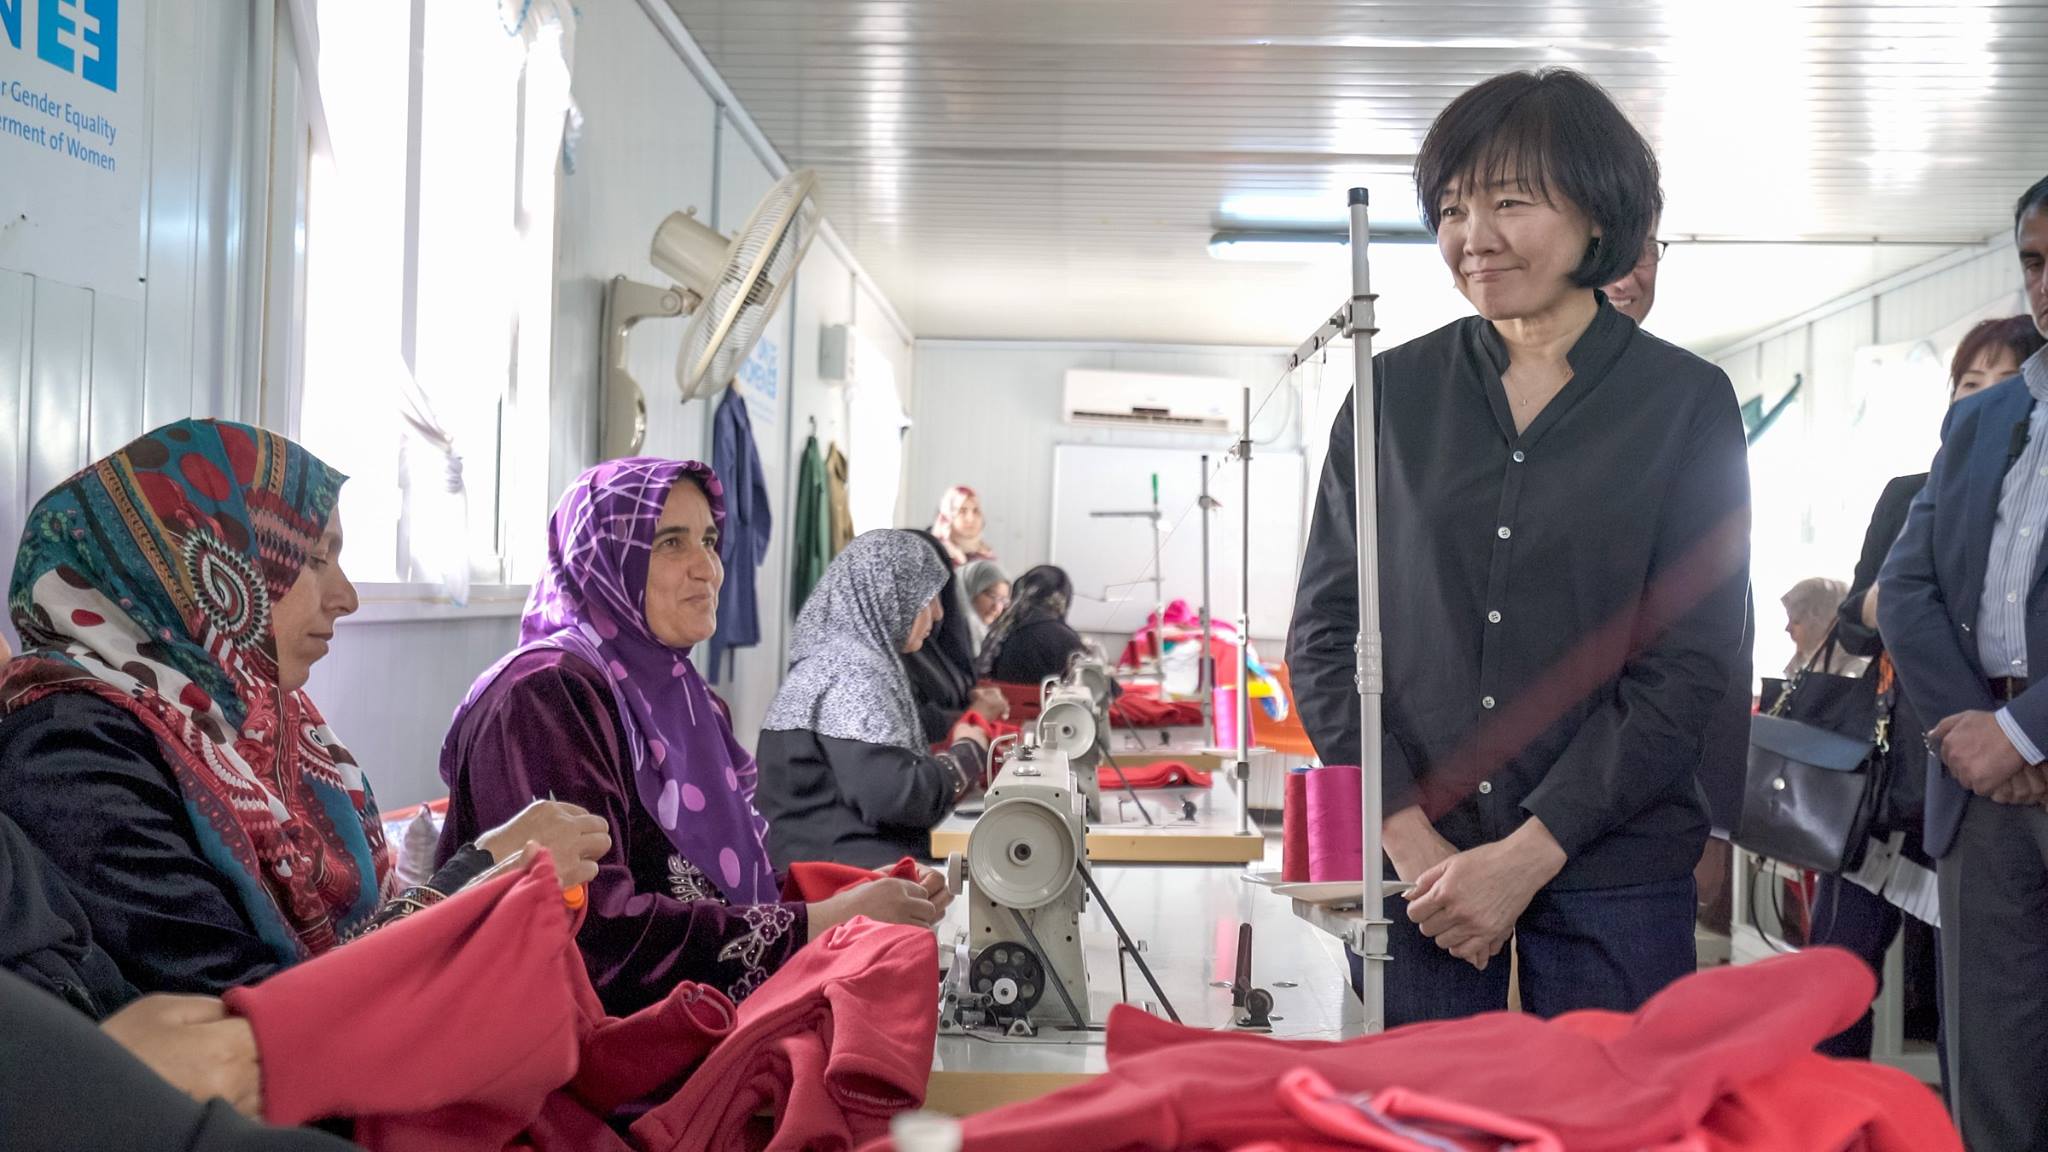 The First Lady, Mrs. Akie Abe visits the tailoring center within the Oasis, meeting the women crafting the baby kits that are distributed throughout the camp hospitals each month. Photo source UN Women/Christopher Herwig